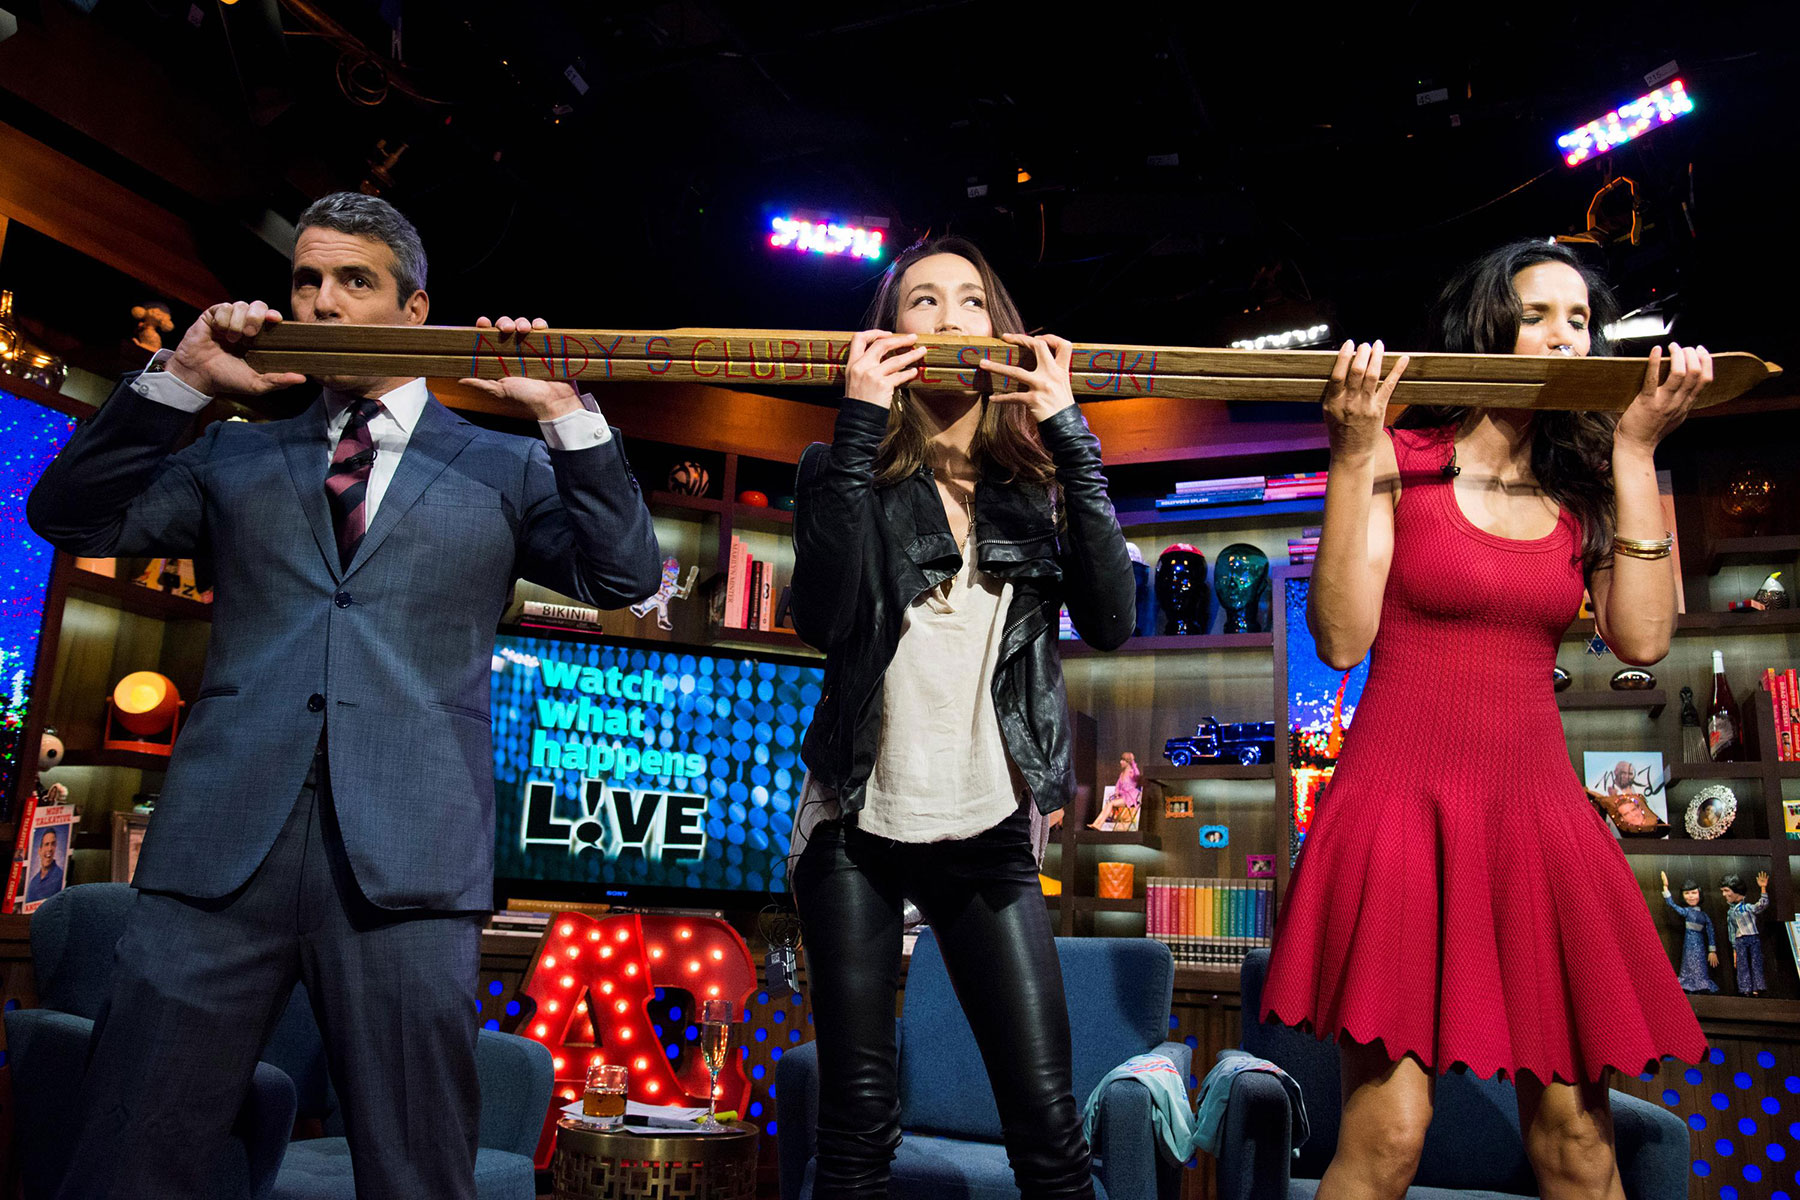 Maggie Q at Watch What Happens Live